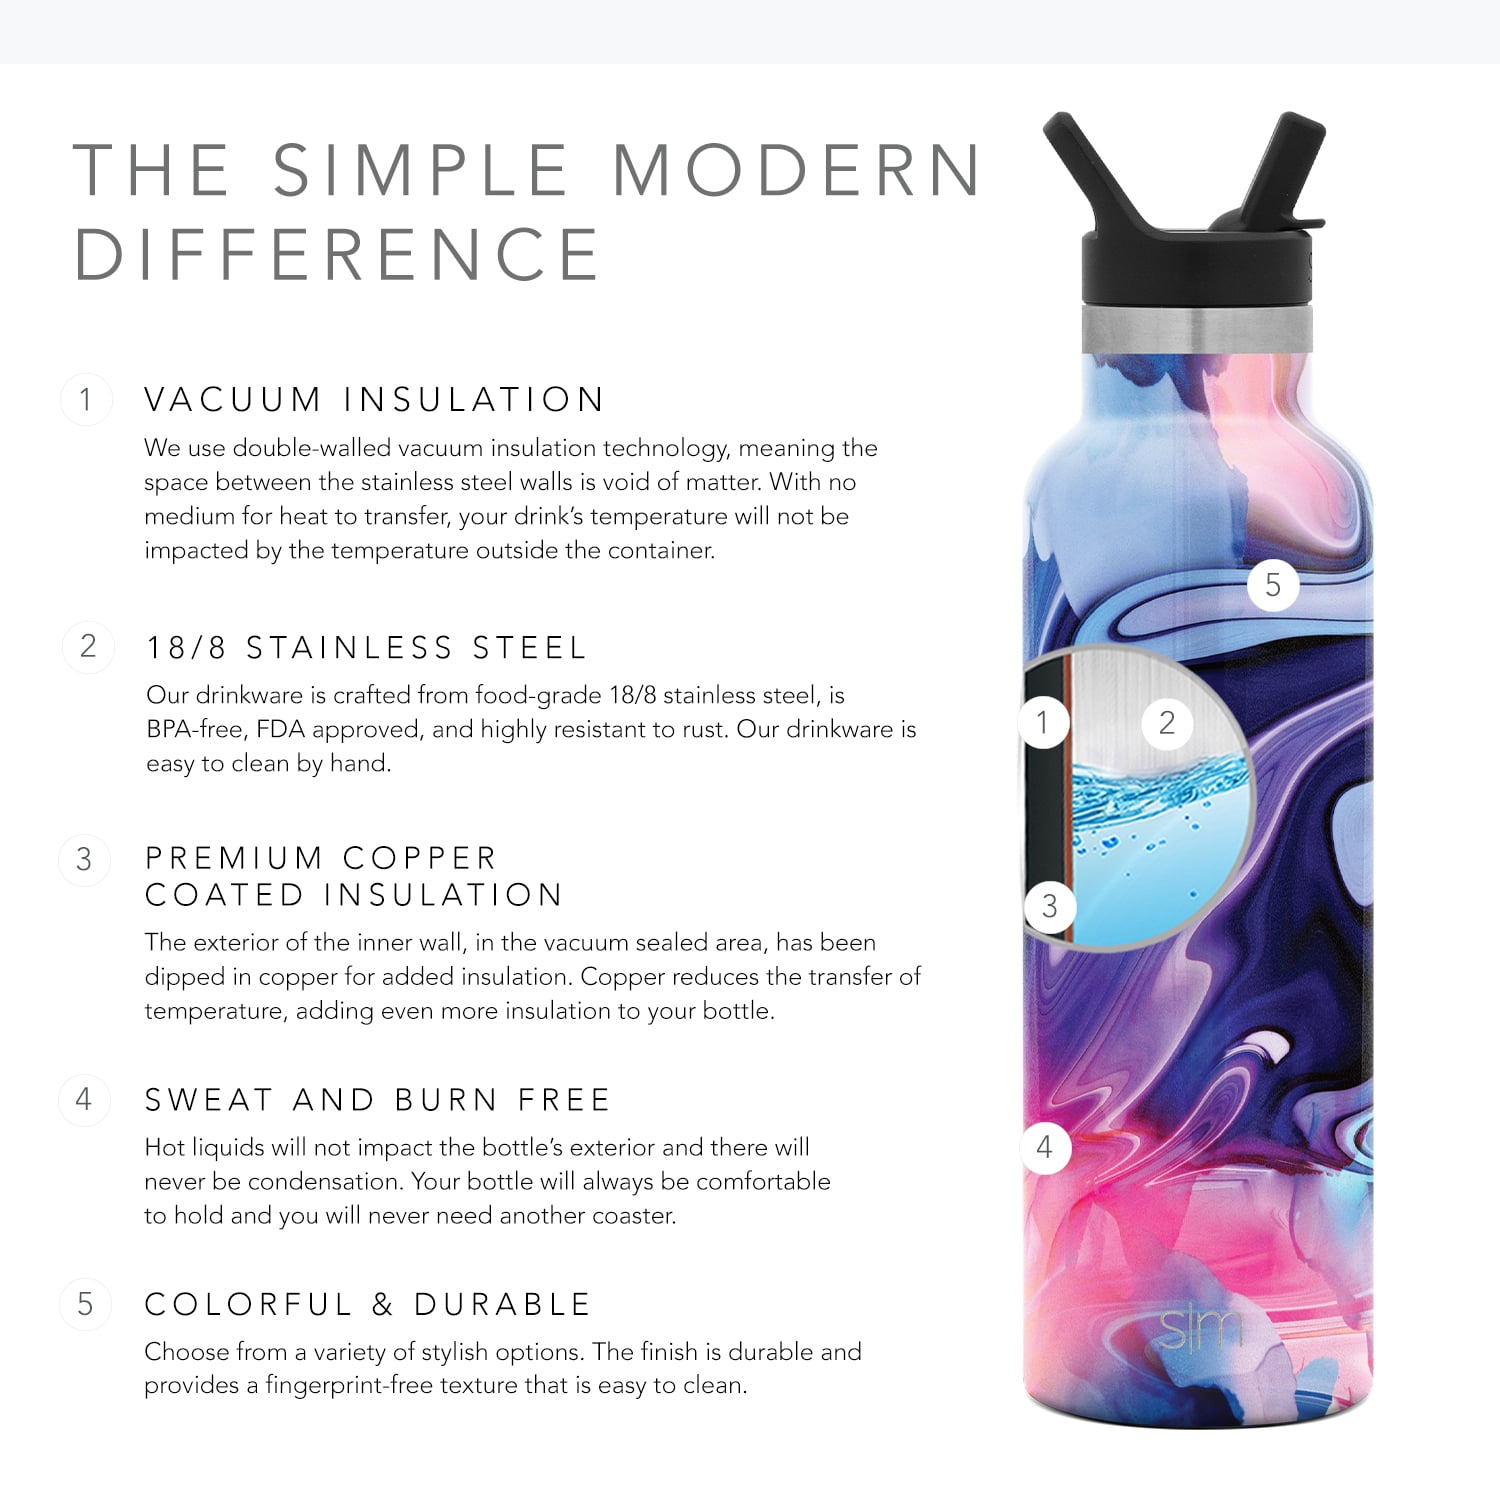 24 Oz. Simple Modern Ascent Water Bottle Straw Lid - SMMD-DB24L1 -  IdeaStage Promotional Products